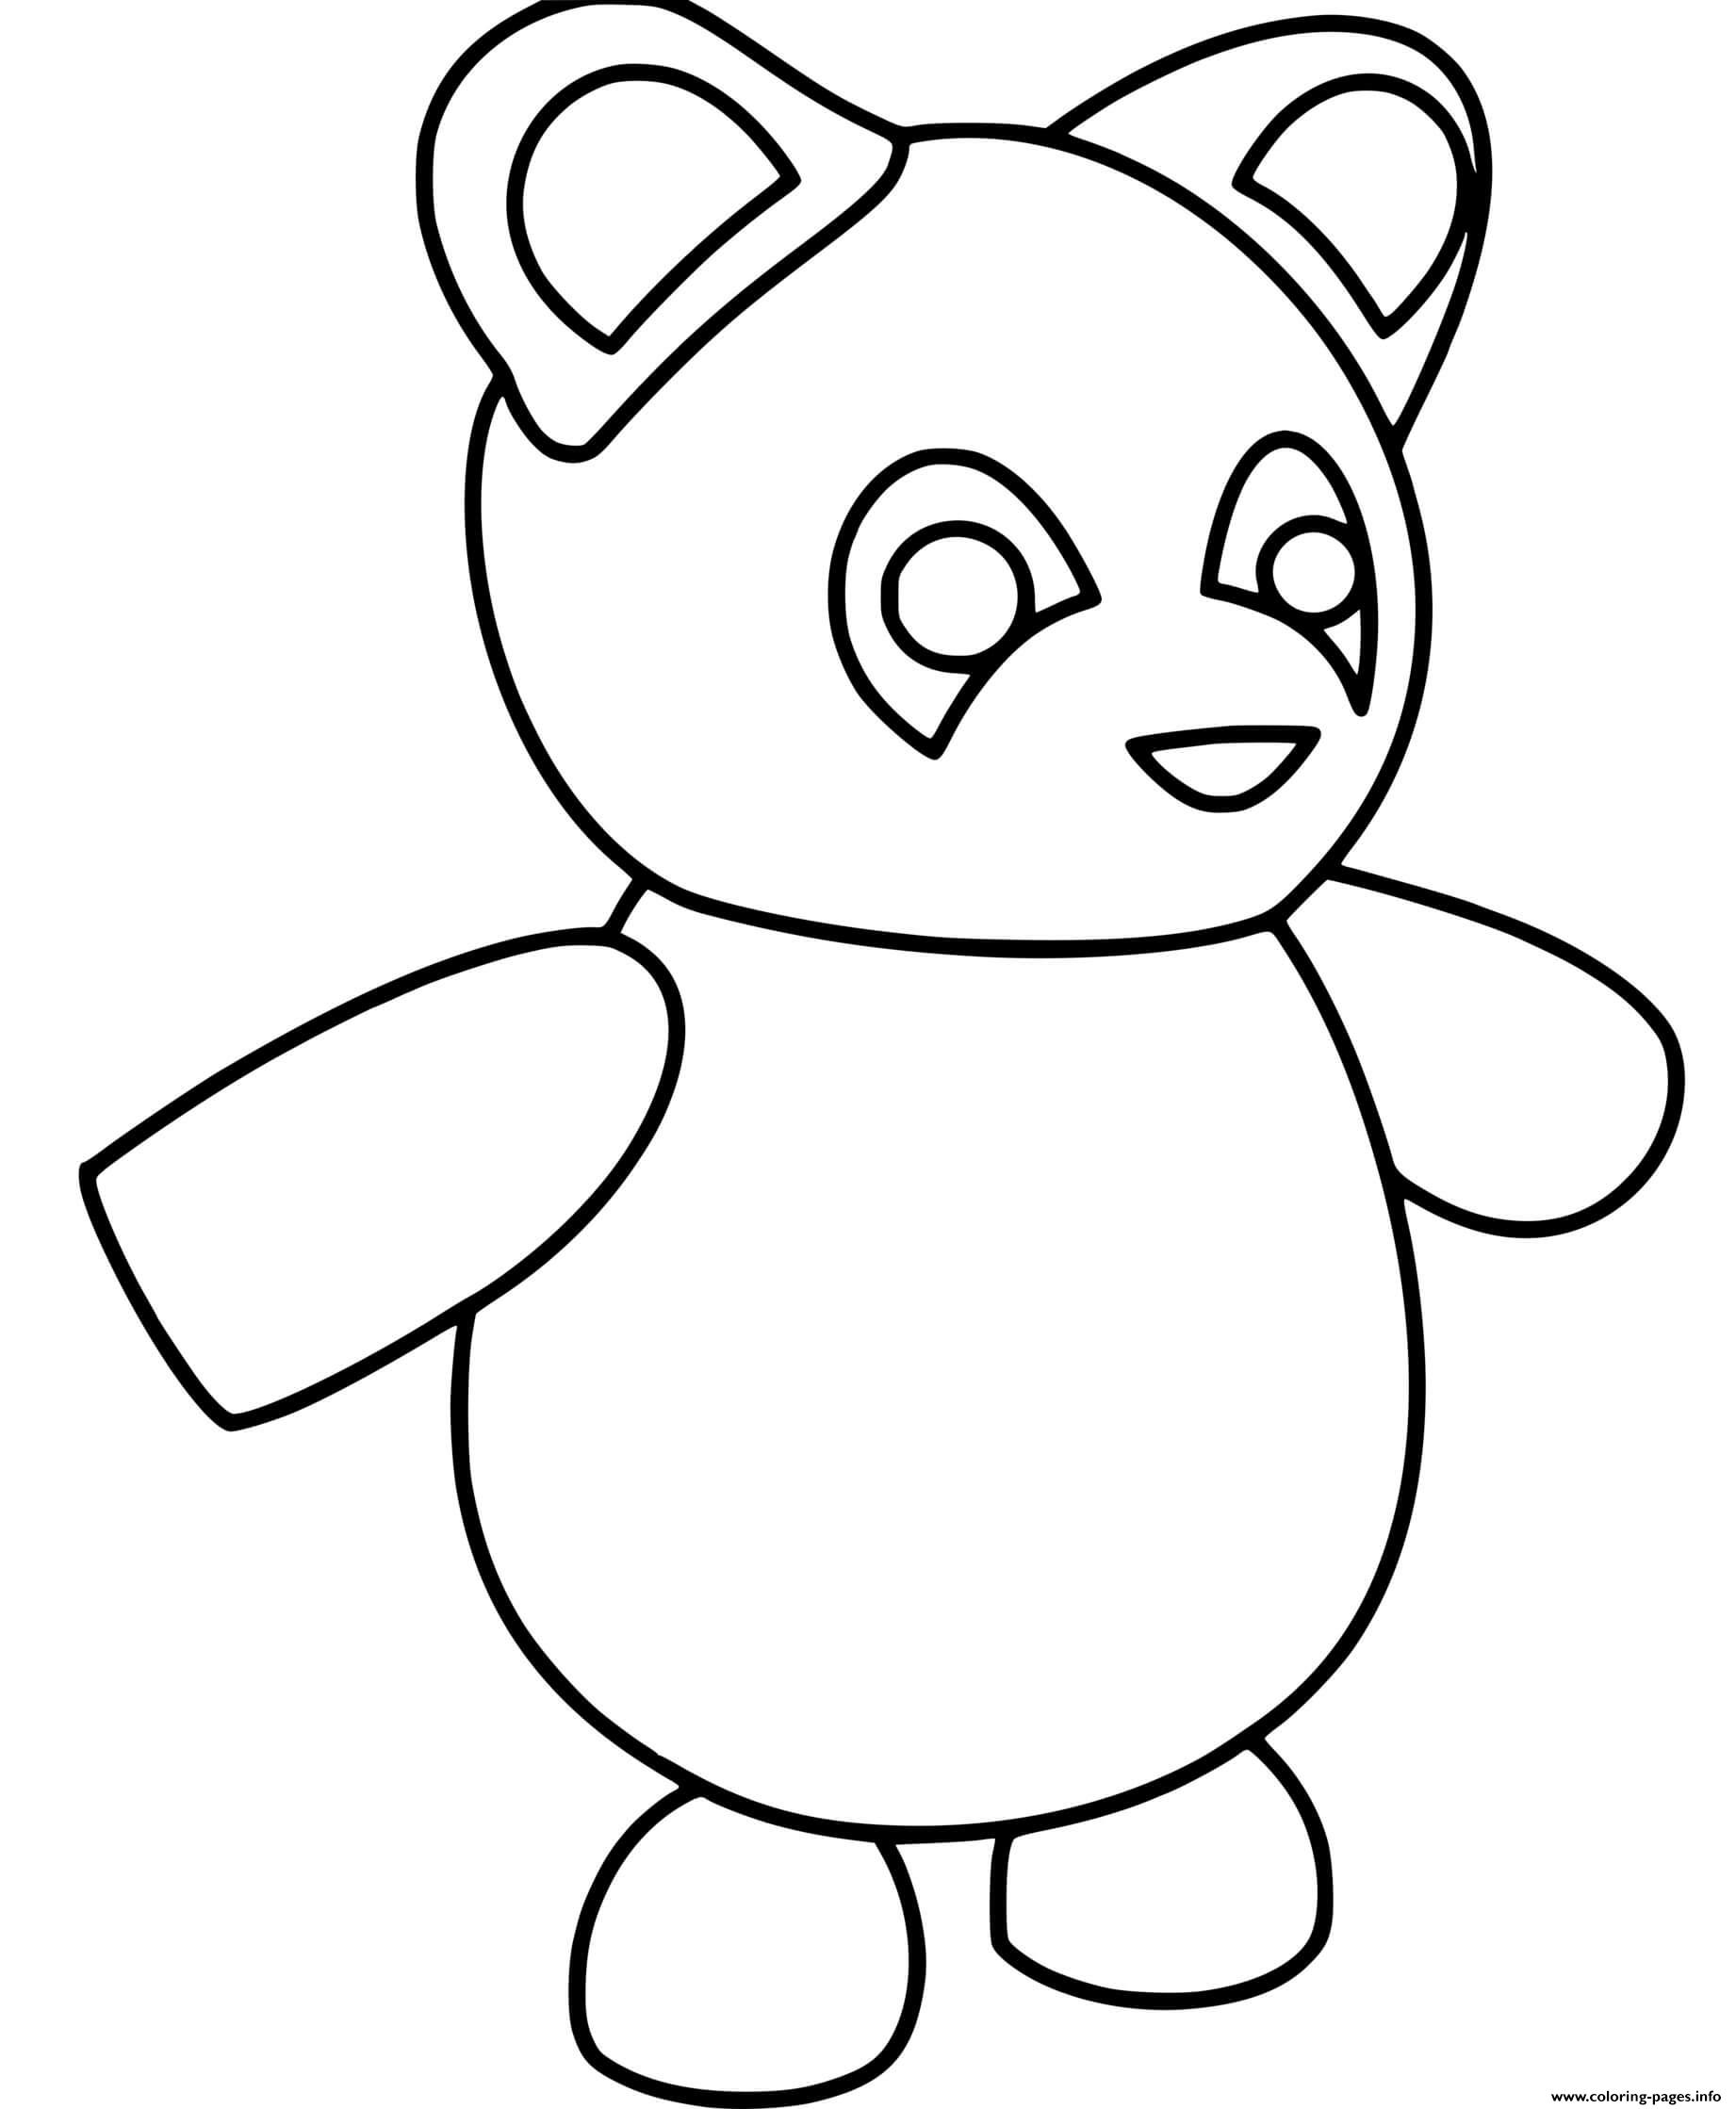 Roblox Adopt Me Panda Coloring Pages Printable - beautiful cute roblox girl coloring pages